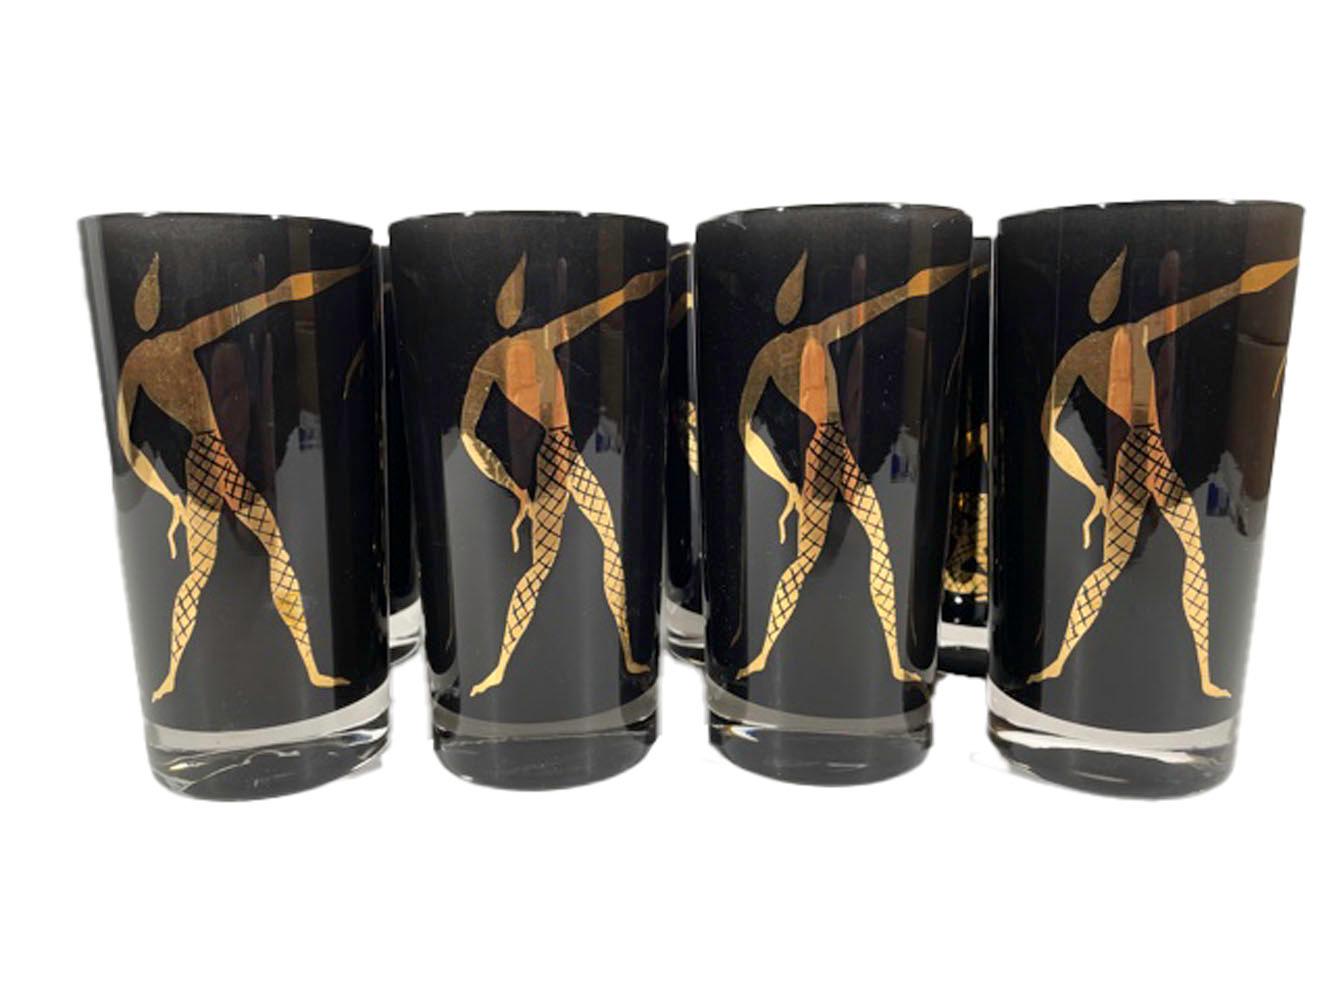 Vintage set of 8 highball glasses. Clear glass with black frosted interiors decorated on the exterior with stylized modern dancers in 22k gold.